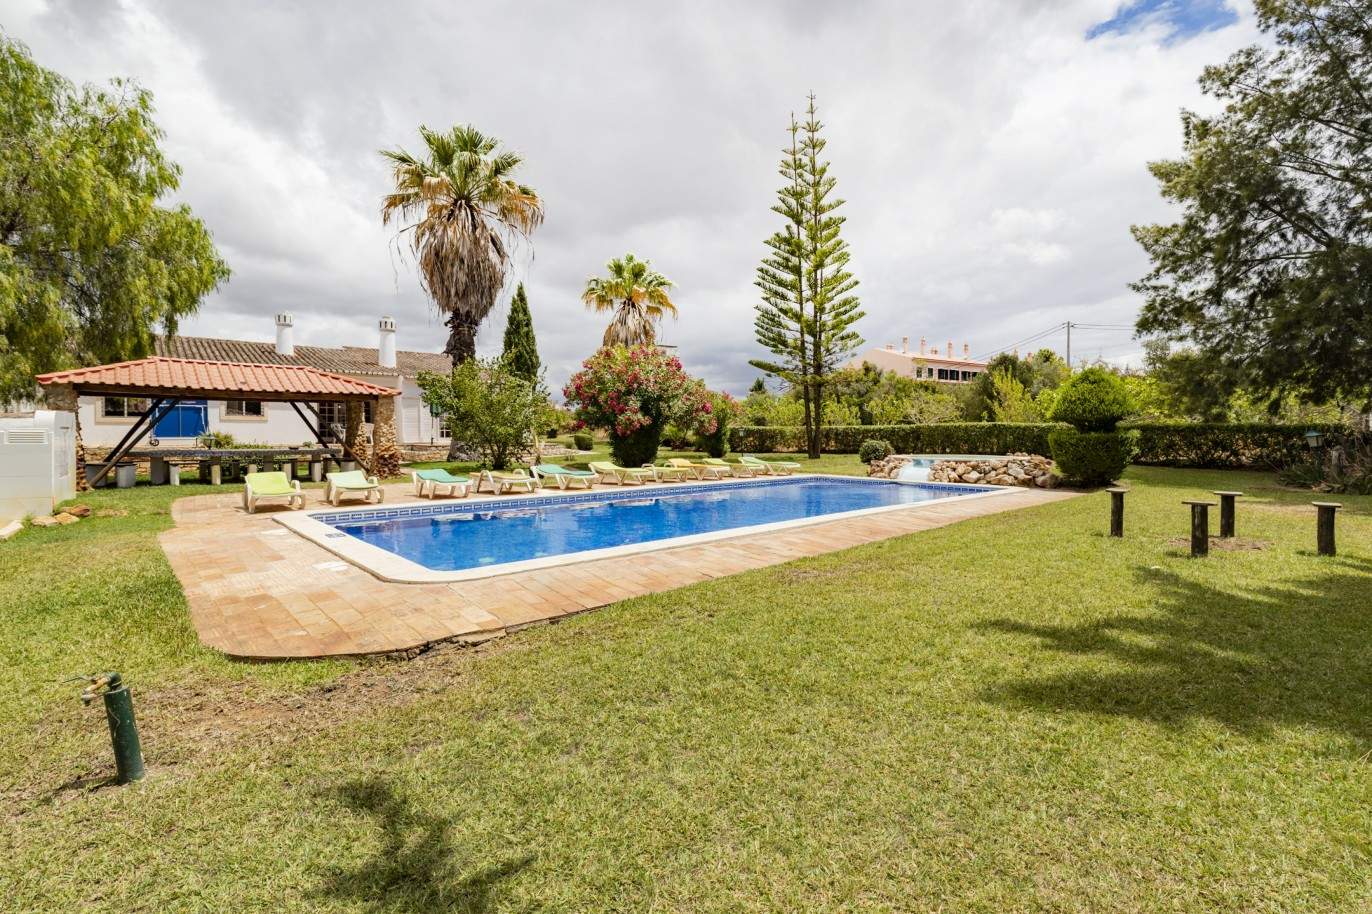 Rustic 5 bedrooms villa with pool and orchard, for sale in Pêra, Algarve_201831